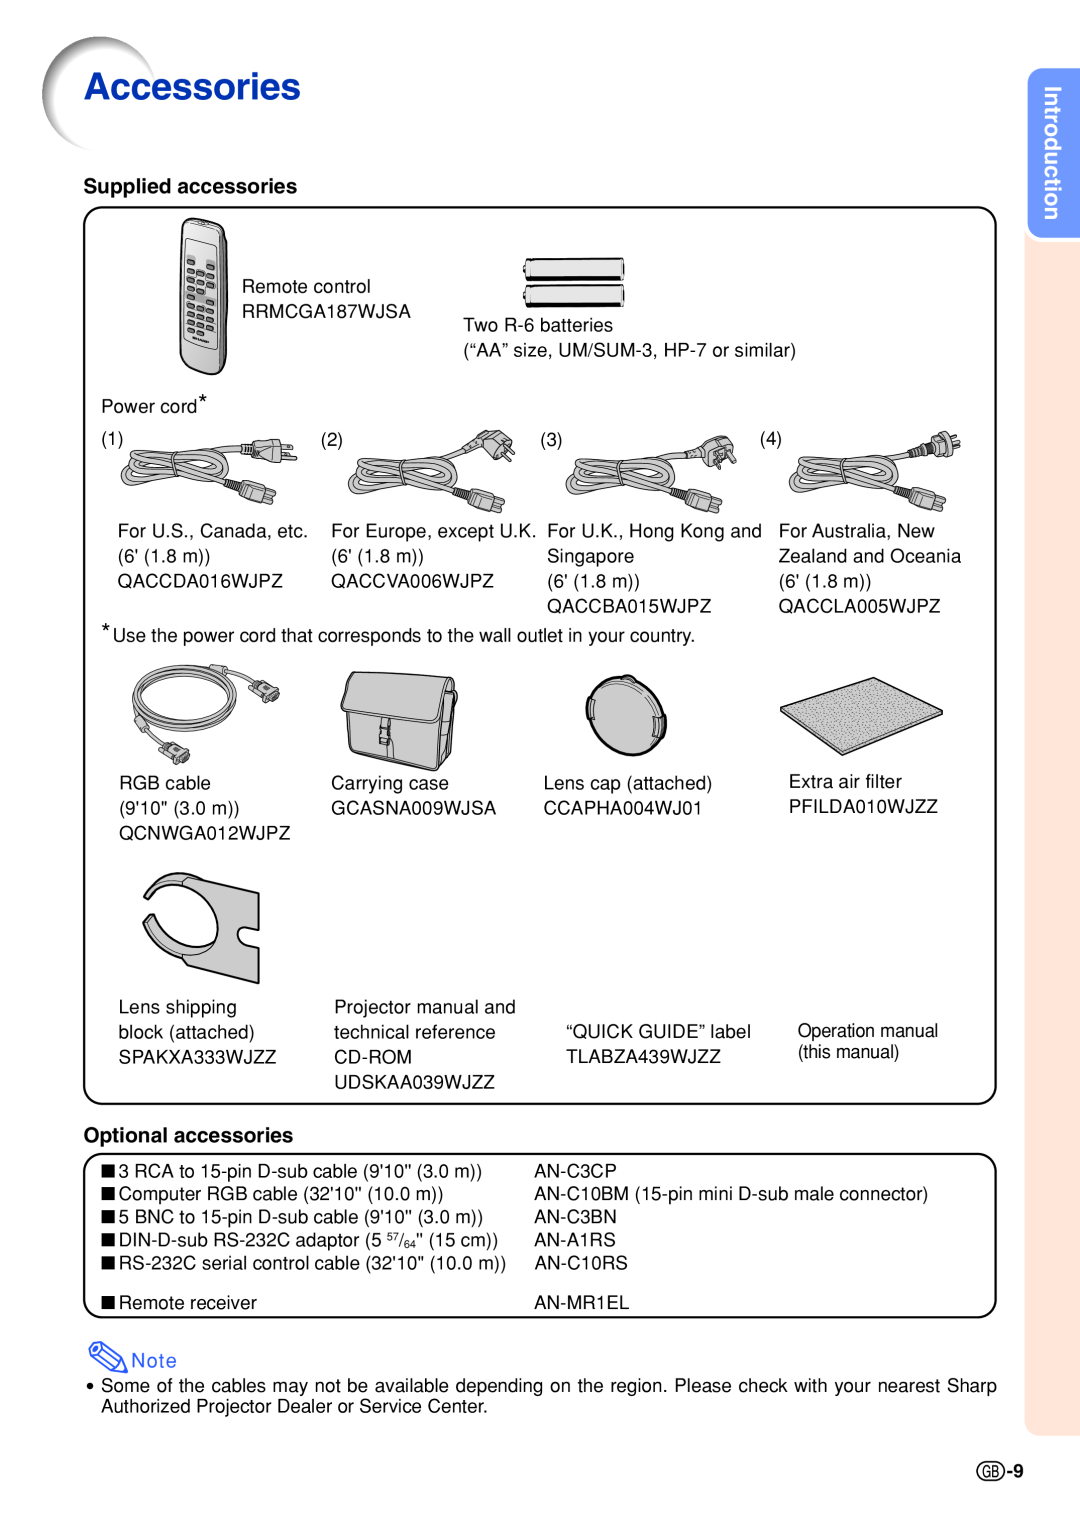 Sharp PG-B10S operation manual Accessories, Supplied accessories, Optional accessories, Introduction 